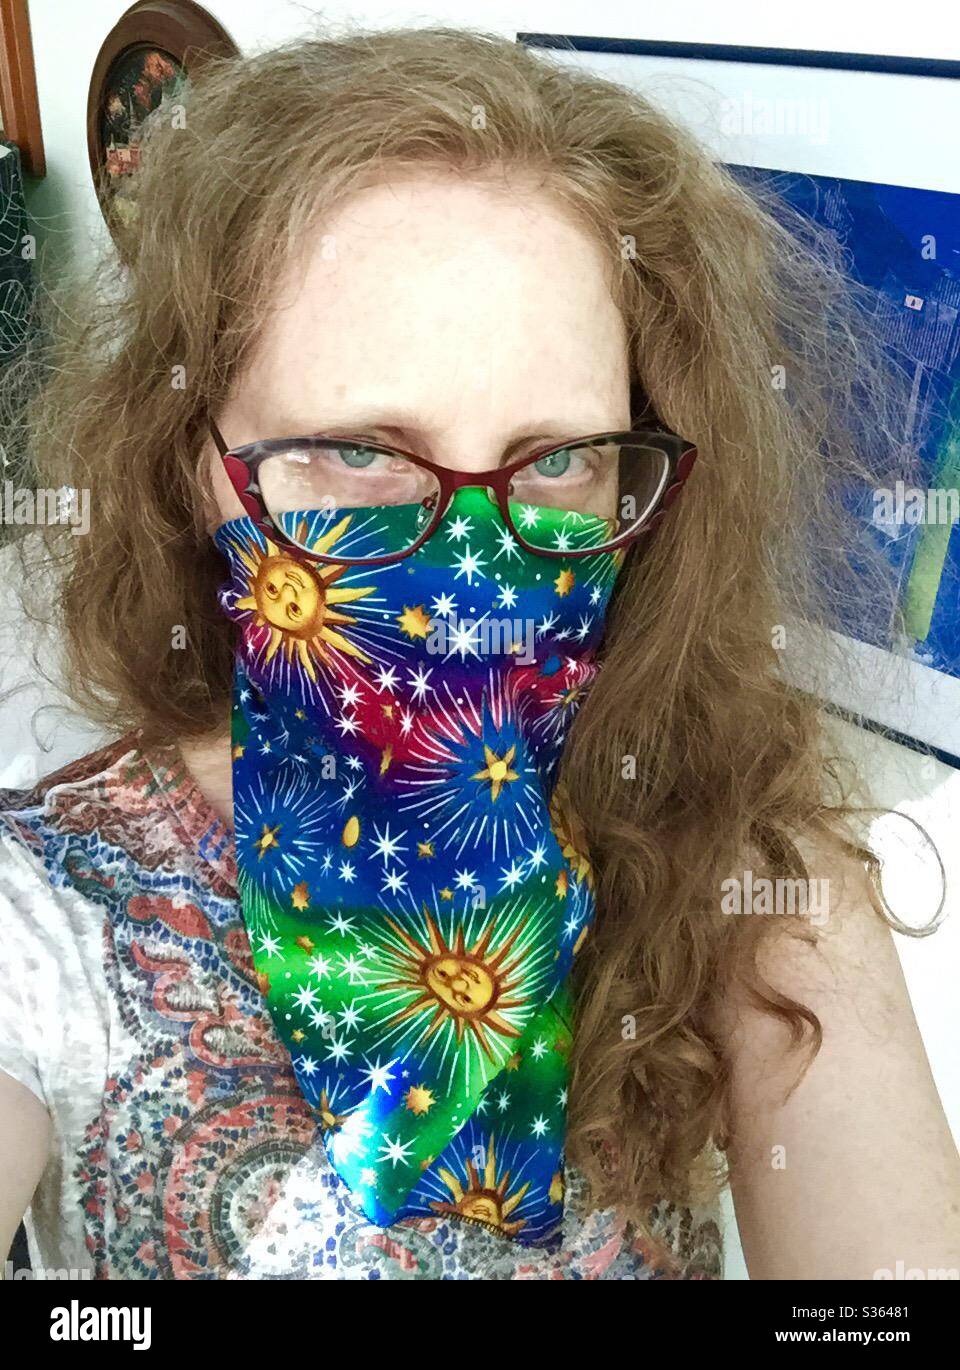 Red haired woman with glasses wears a fancy handkerchief with sun and stars as a mask, PPE, to protect against COVID19 virus transmission. Stock Photo